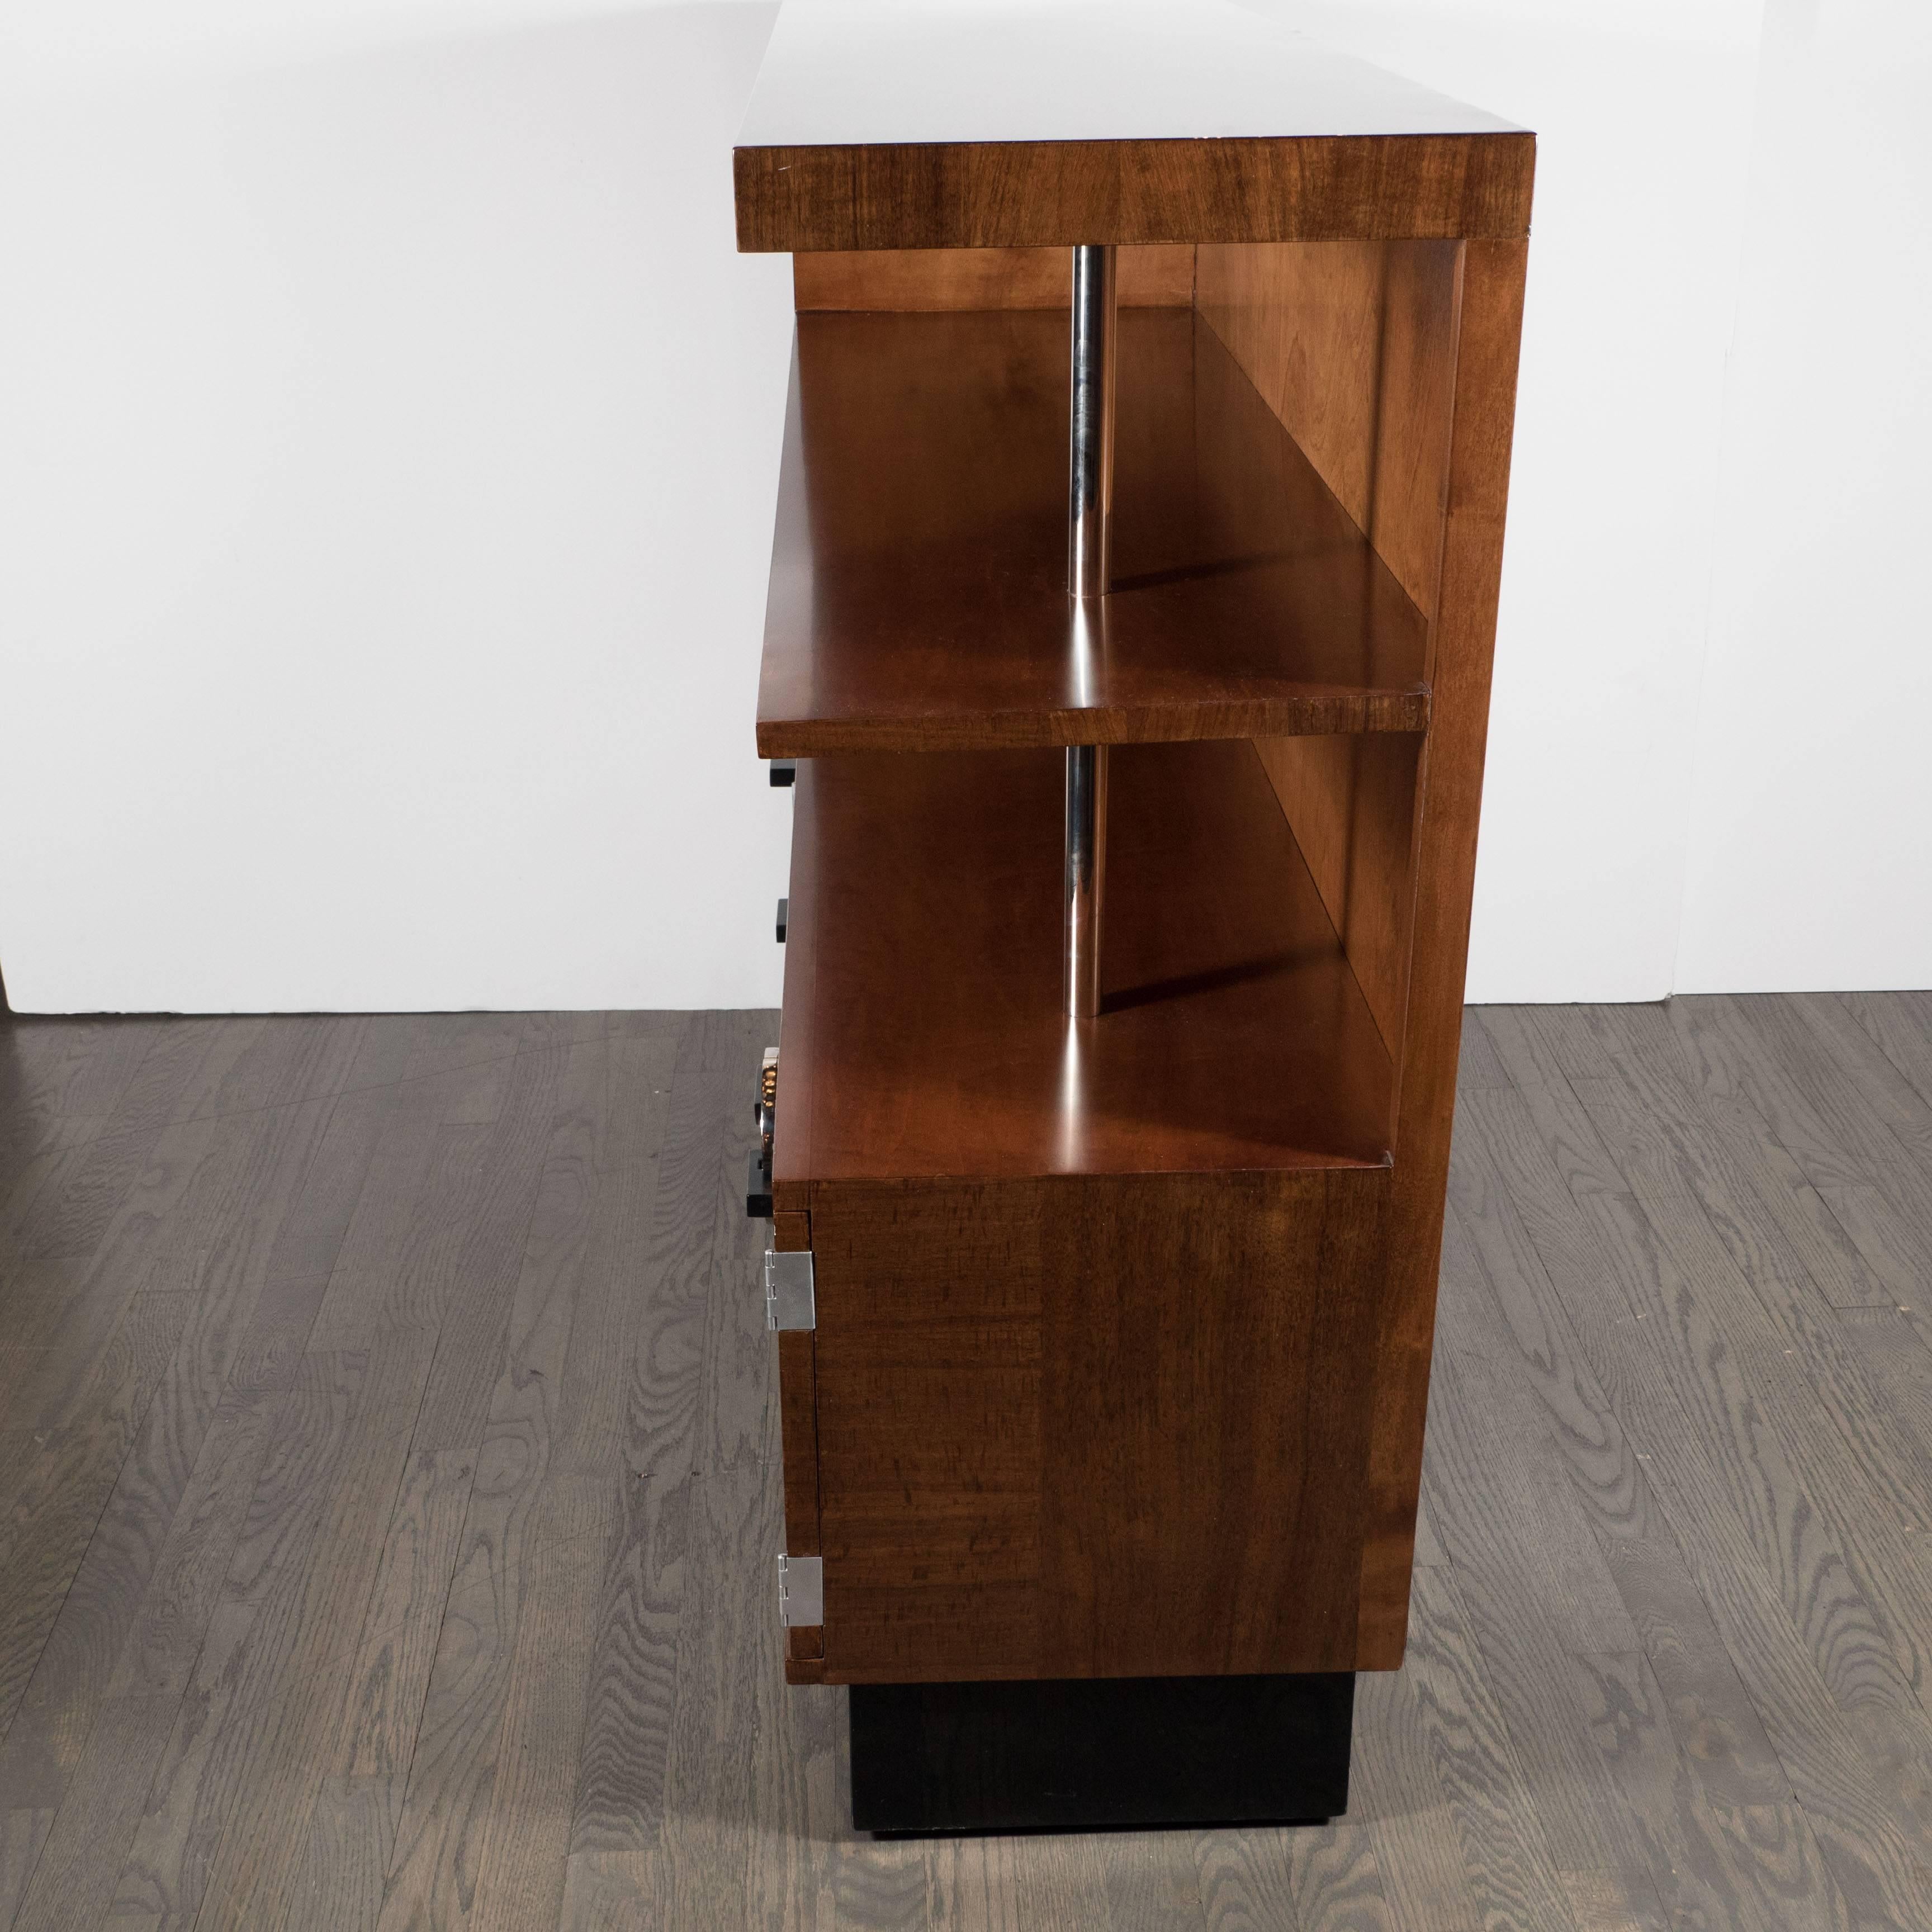 Art Deco Bookcase/Cabinet by Gilbert Rohde in East Indian Laurel, Model No. 344 2